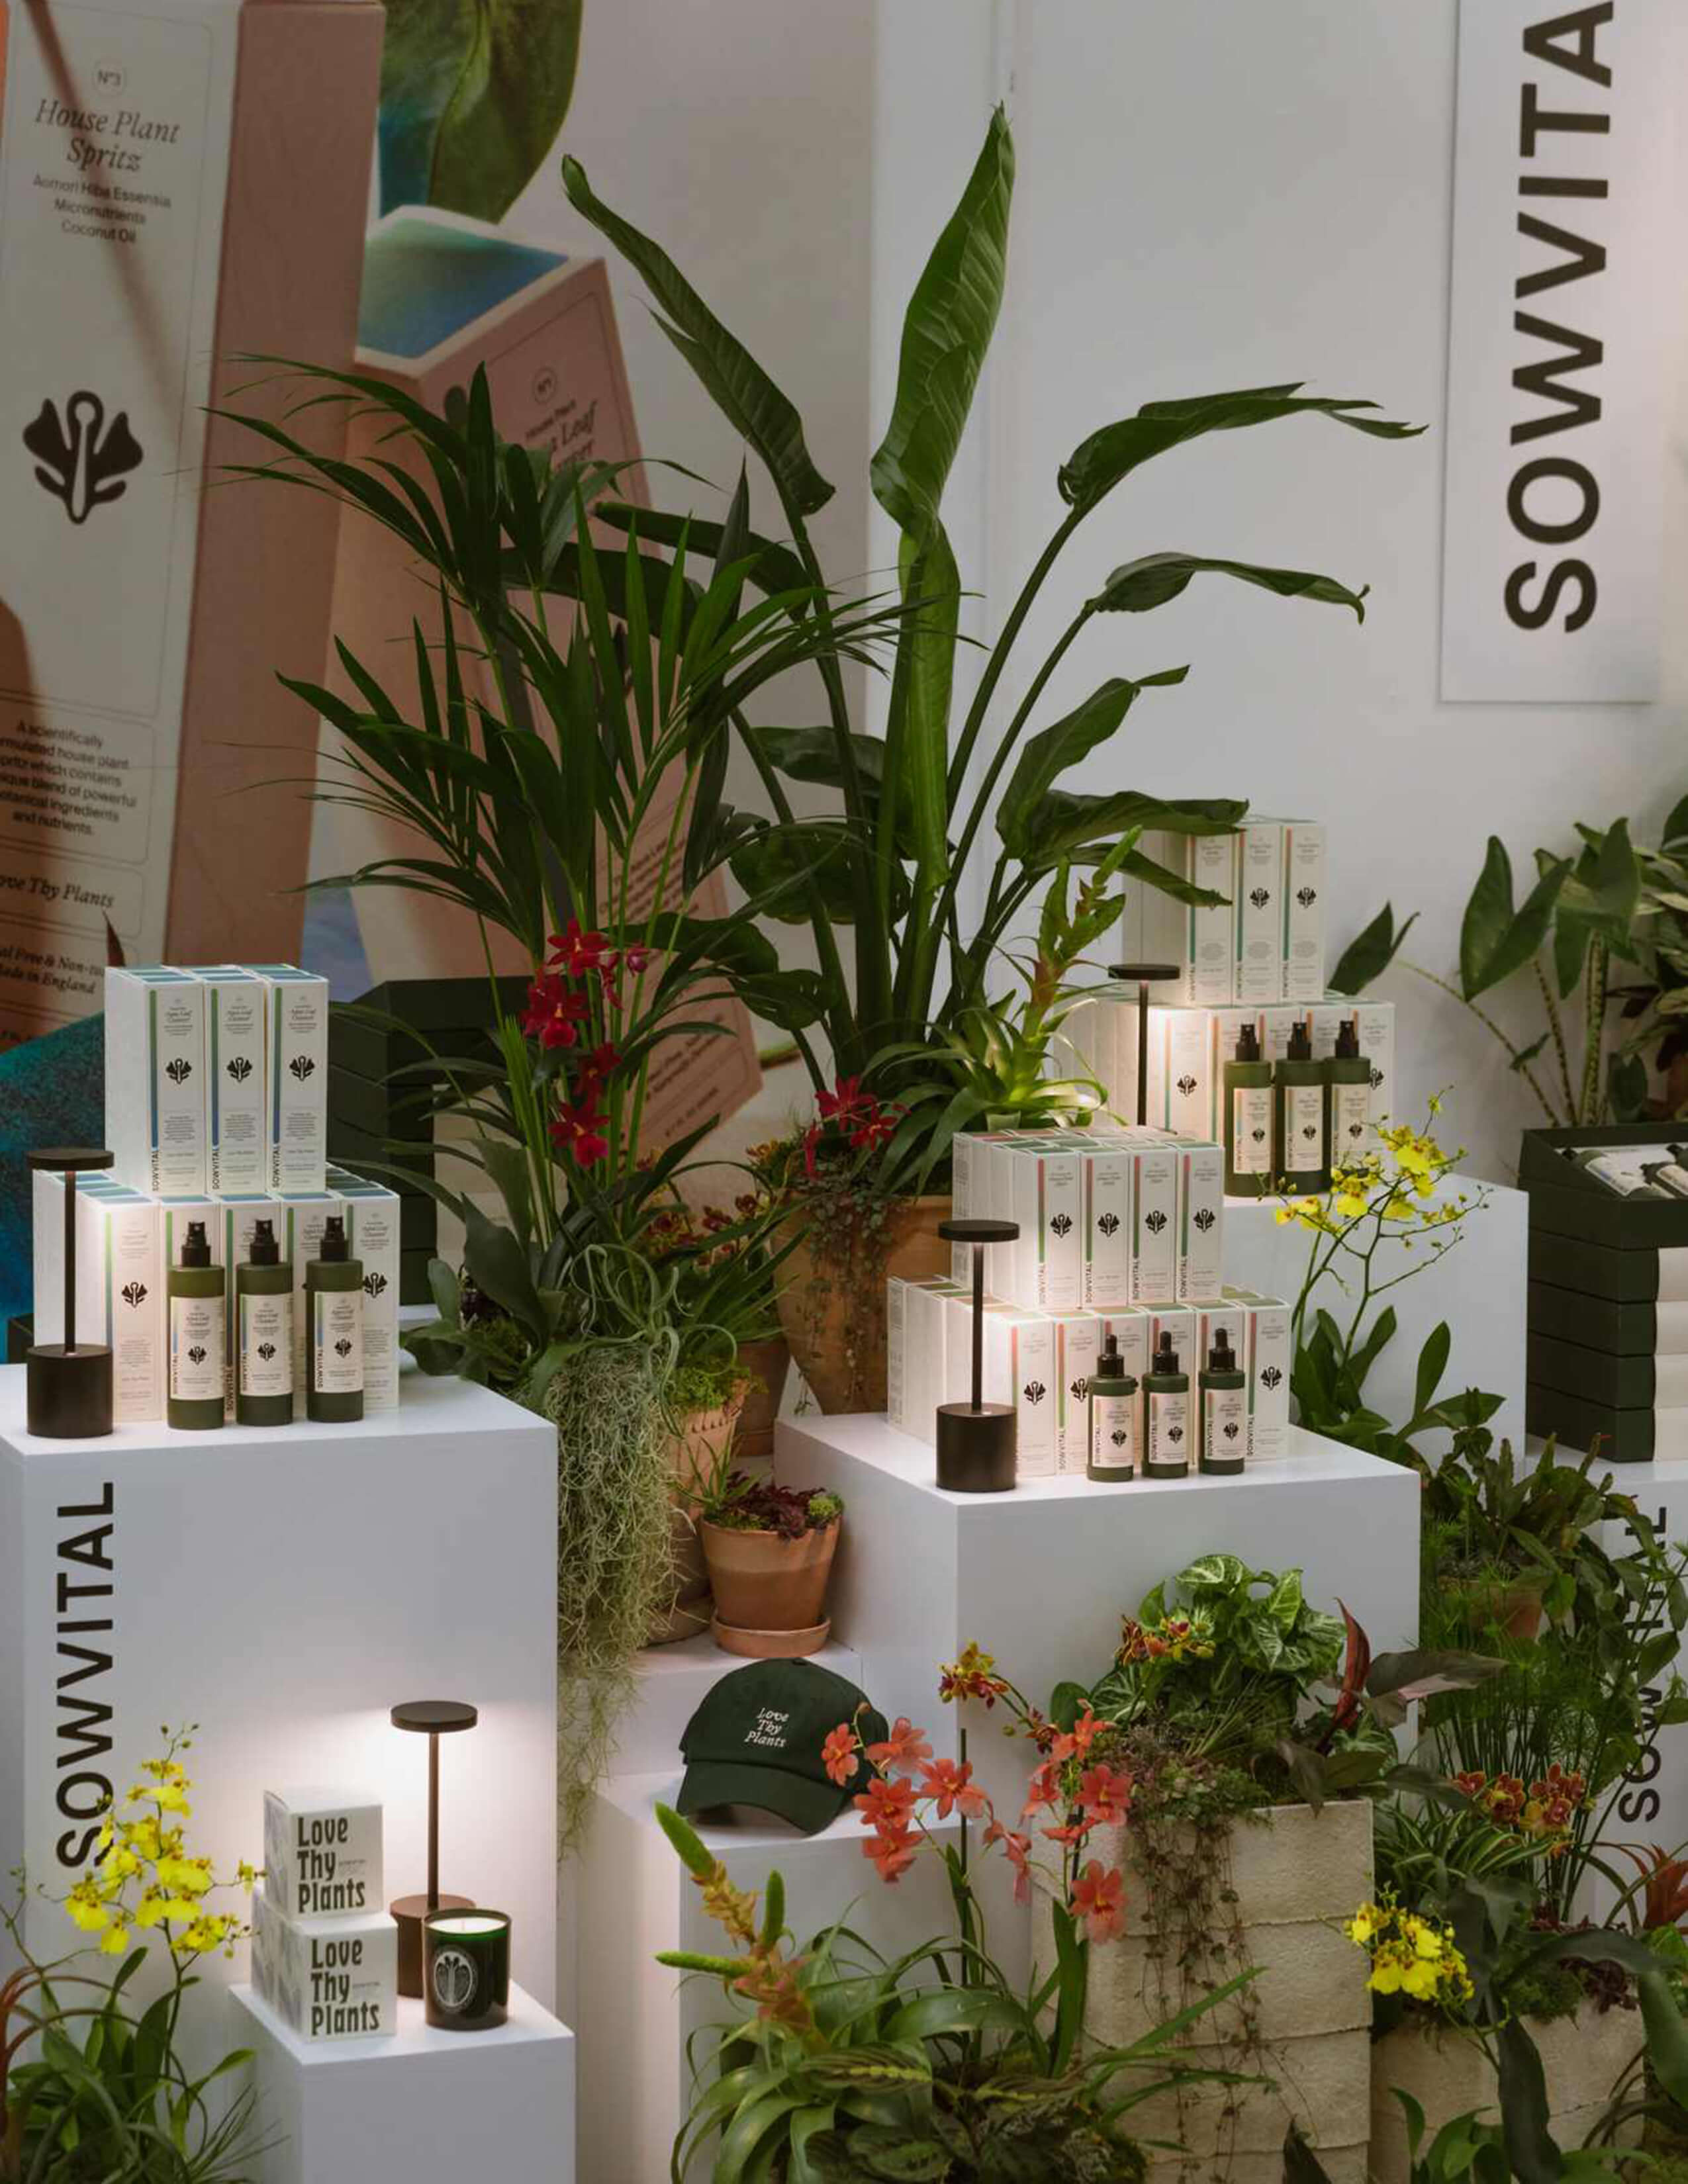 The Sowvital house plant products display an extensive collection of different plants/flowers.